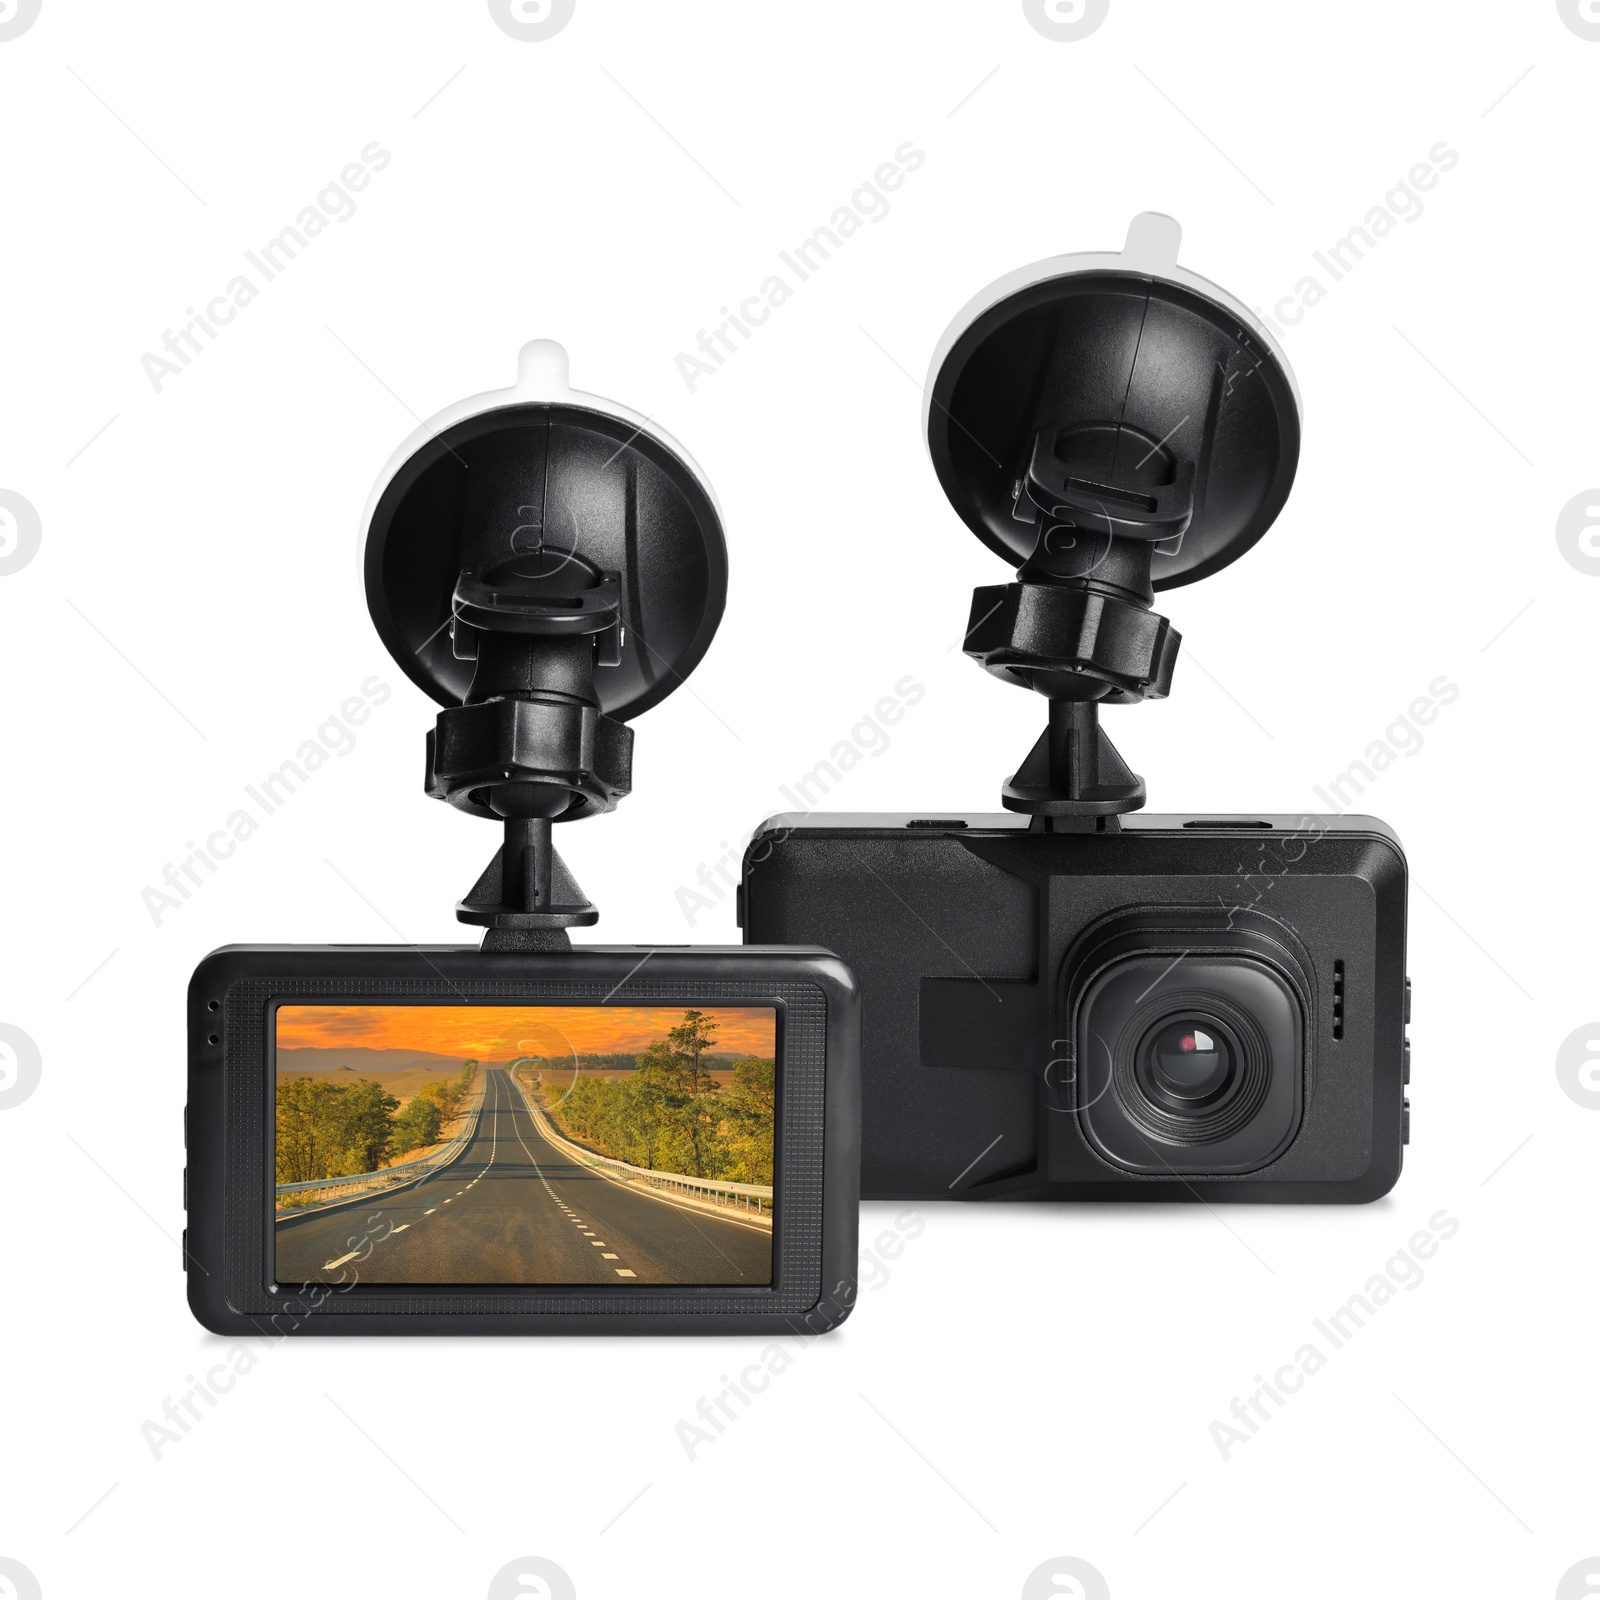 Image of Modern car dashboard cameras on white background in collage, one with photo of road